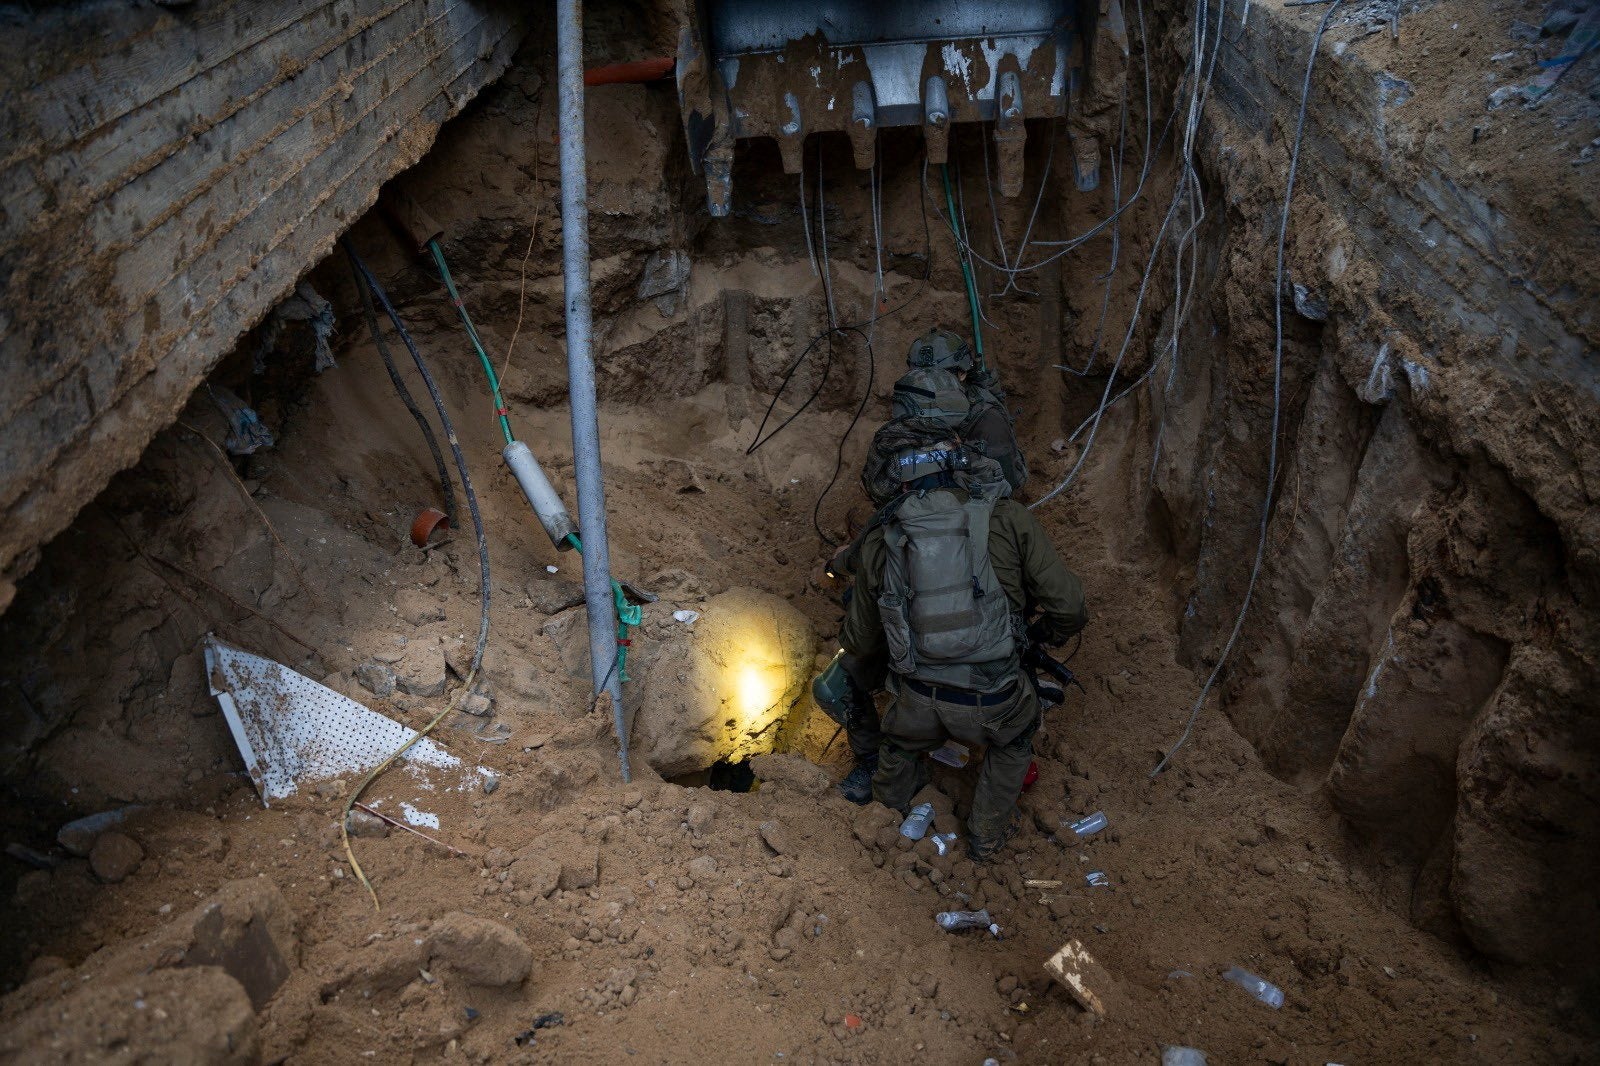 Israeli soldiers take position at what they say is a tunnel during the ongoing ground operation